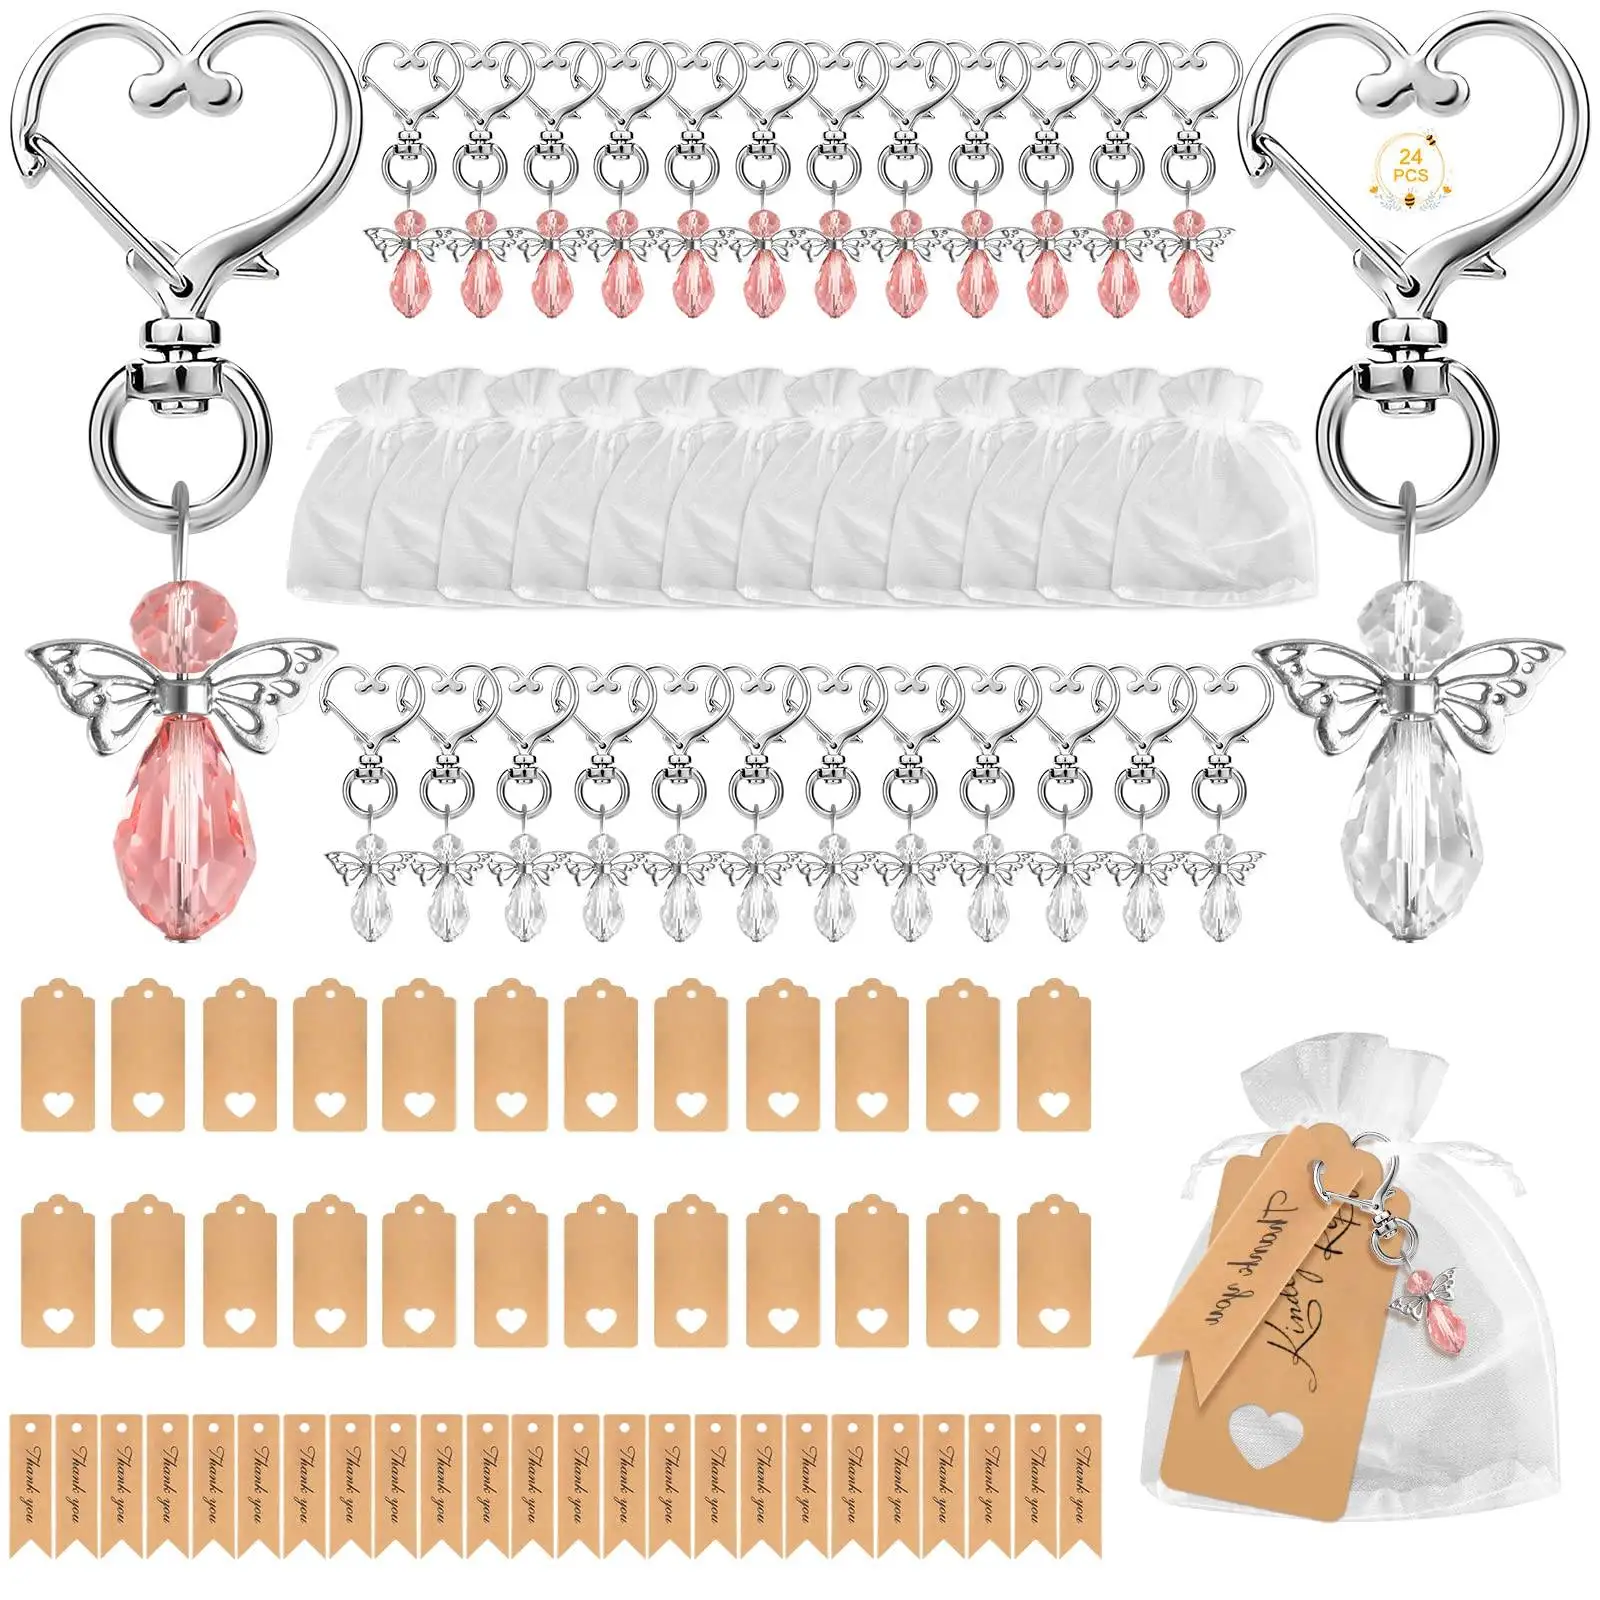 

24PCS Angel Keychains, Guardian Angel Pendants with Organza Bags and Thank You Tag for Wedding Party Return Gifts Favors